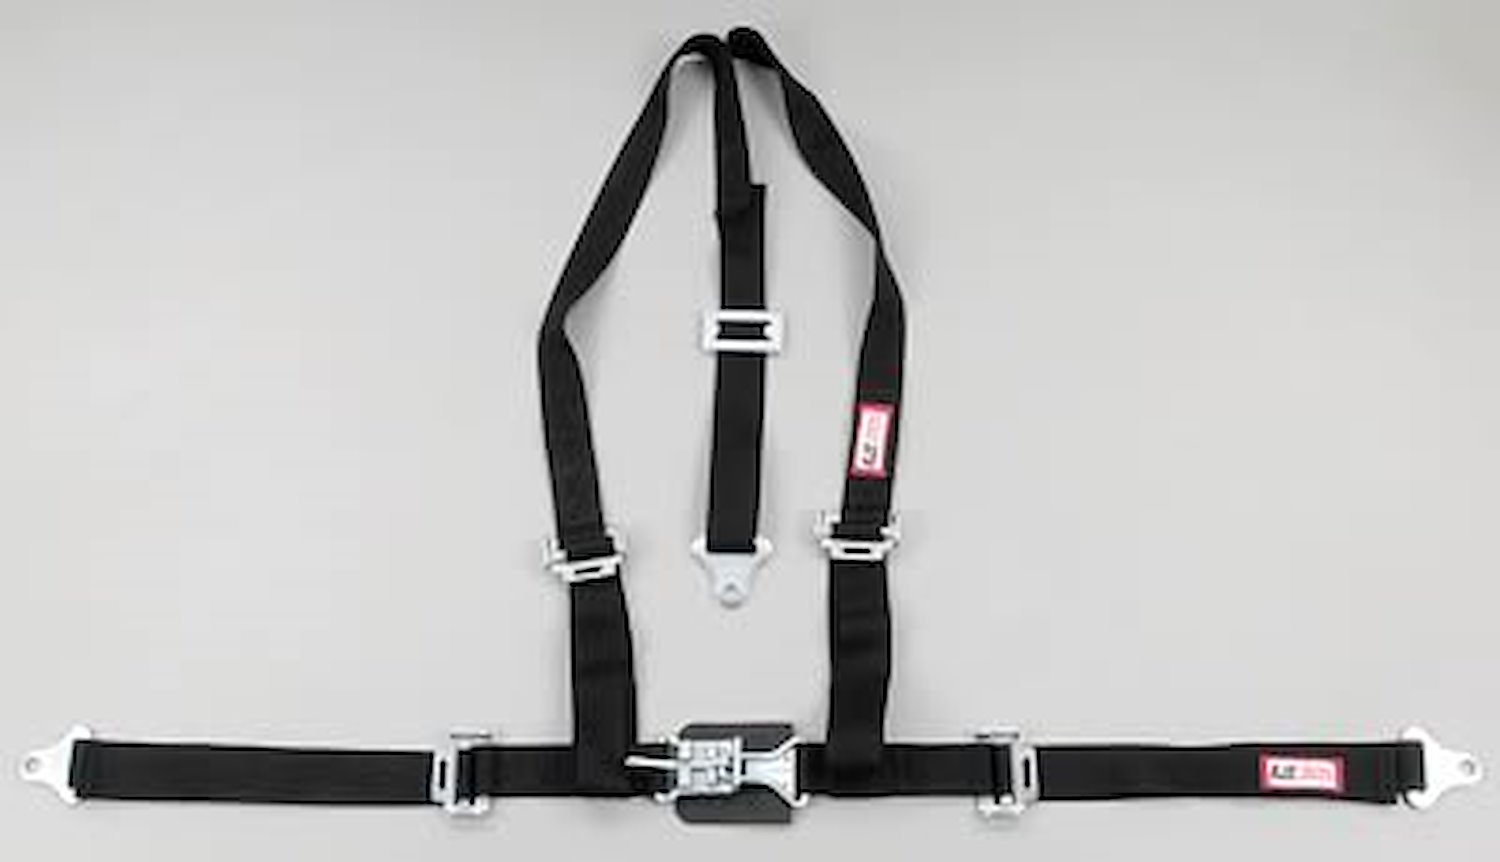 NON-SFI L&L HARNESS 2 PULL UP Lap Belt SEWN IN 2 S.H. V ROLL BAR Mount ALL SNAP ENDS BLACK